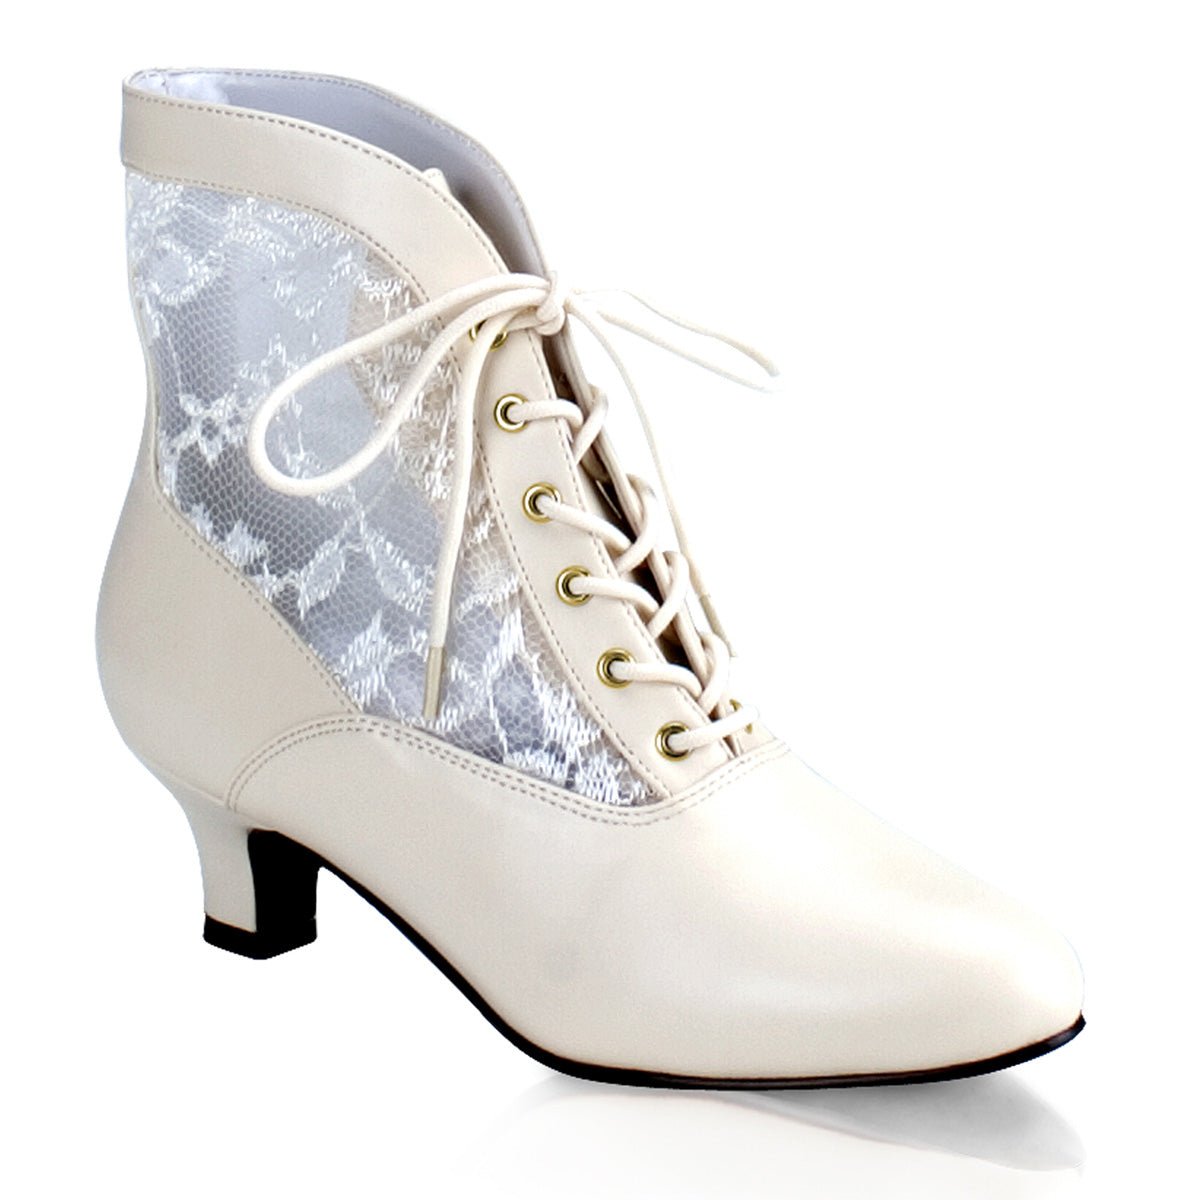 Clearance Funtasma Dame 05 Ivory Size 6UK/9USA - From Clearance Sold By Alternative Footwear